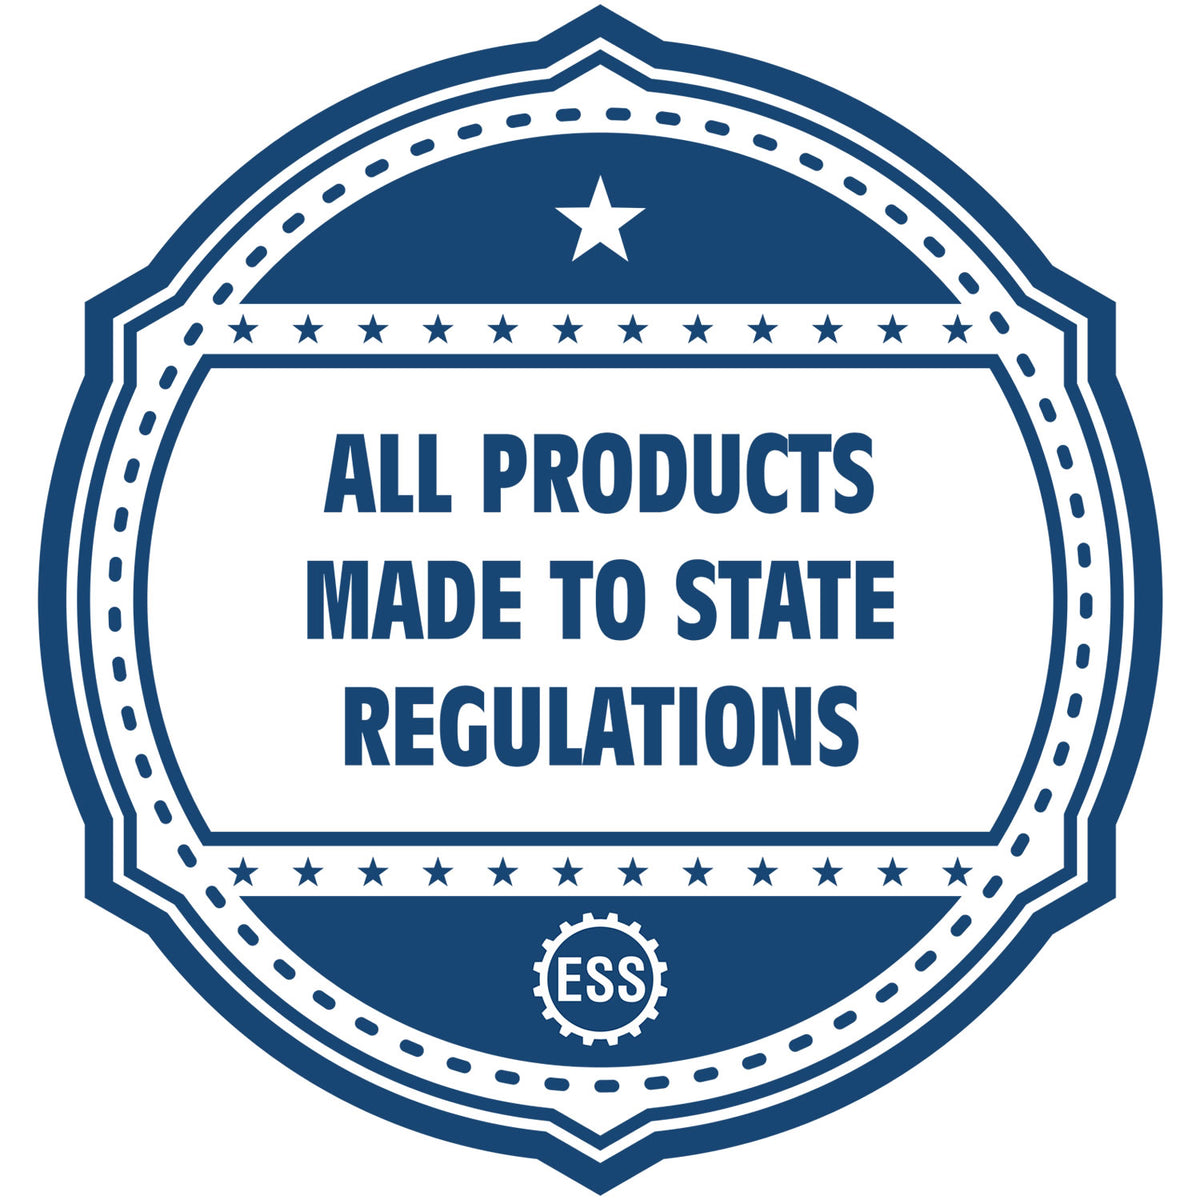 An icon or badge element for the Delaware Desk Architect Embossing Seal showing that this product is made in compliance with state regulations.